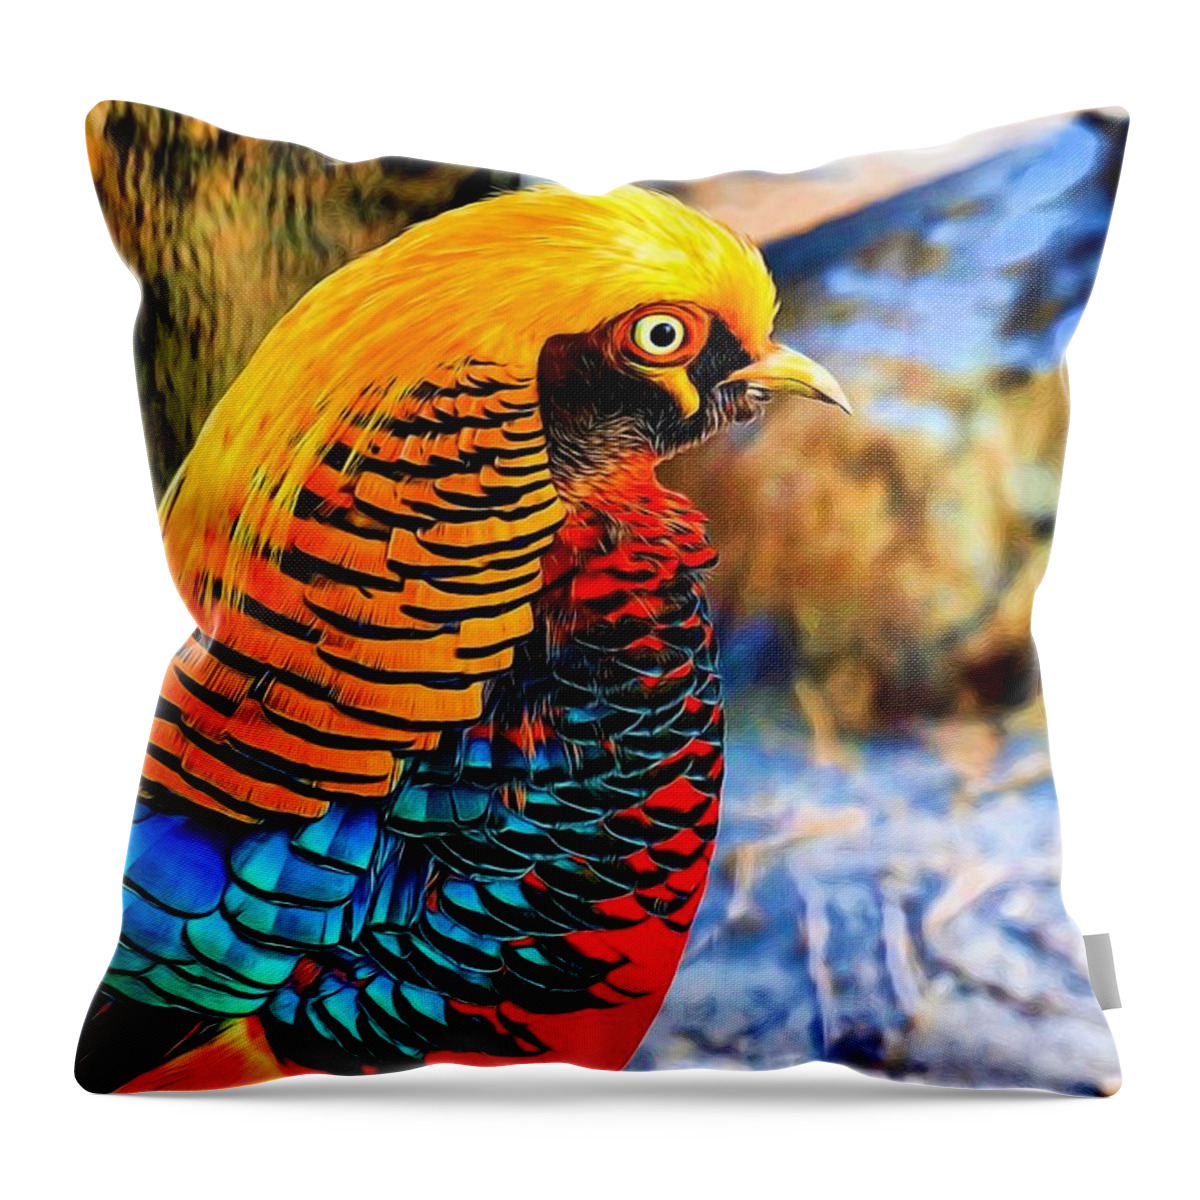 Golden Pheasant Throw Pillow featuring the digital art Golden Pheasant Painterly by Lilia D